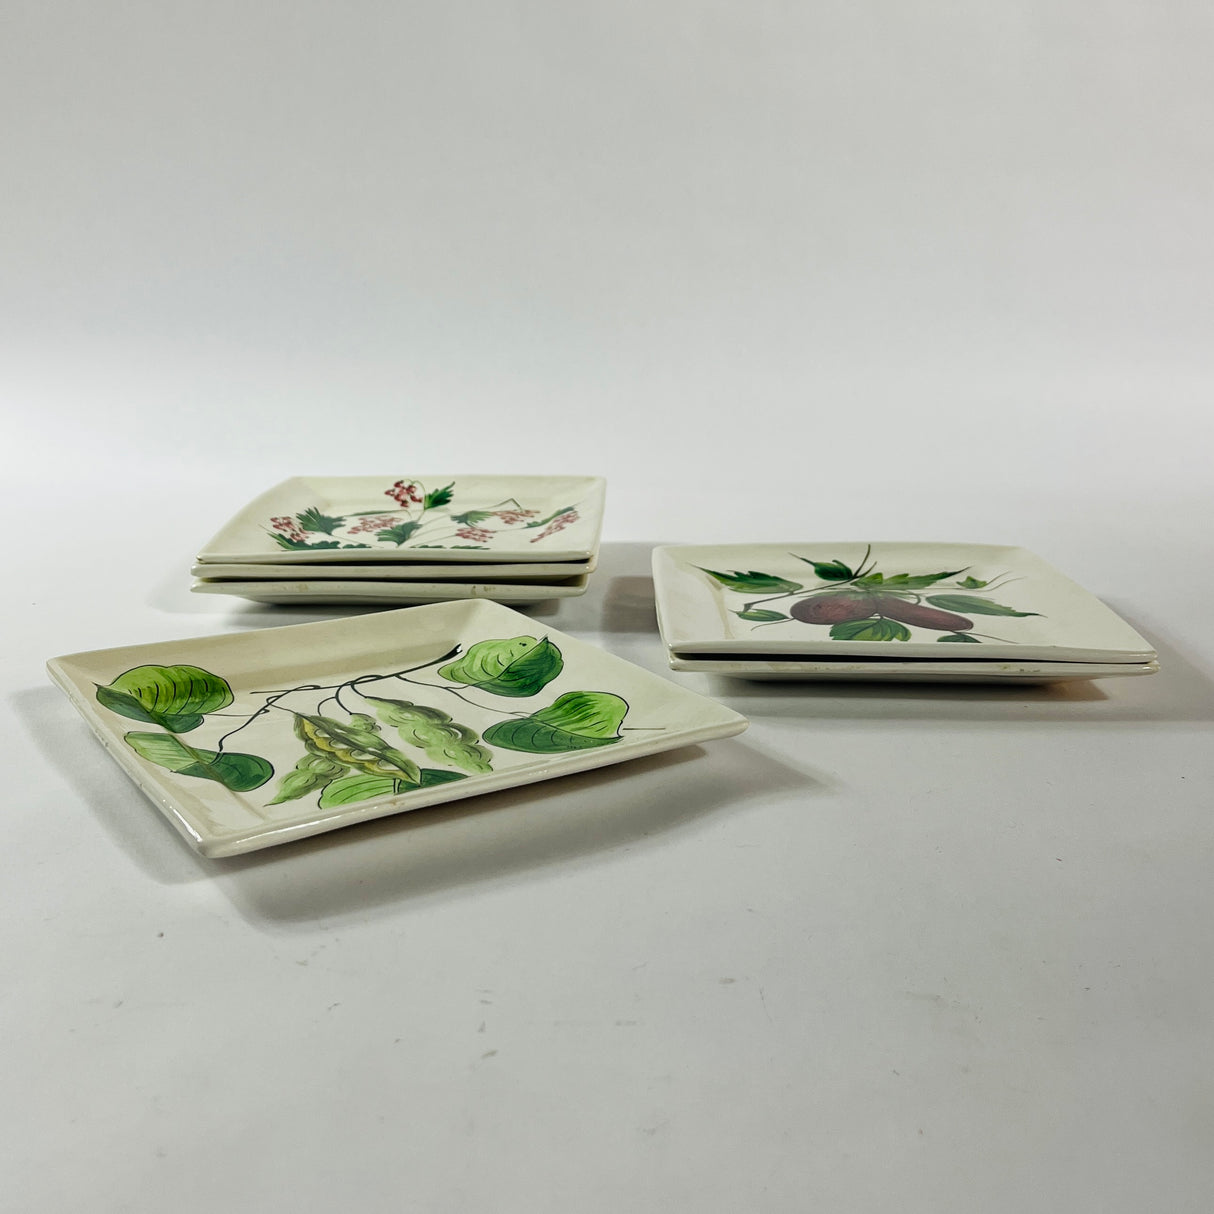 Italian Fruit and Vegetable Plates, Set of 6